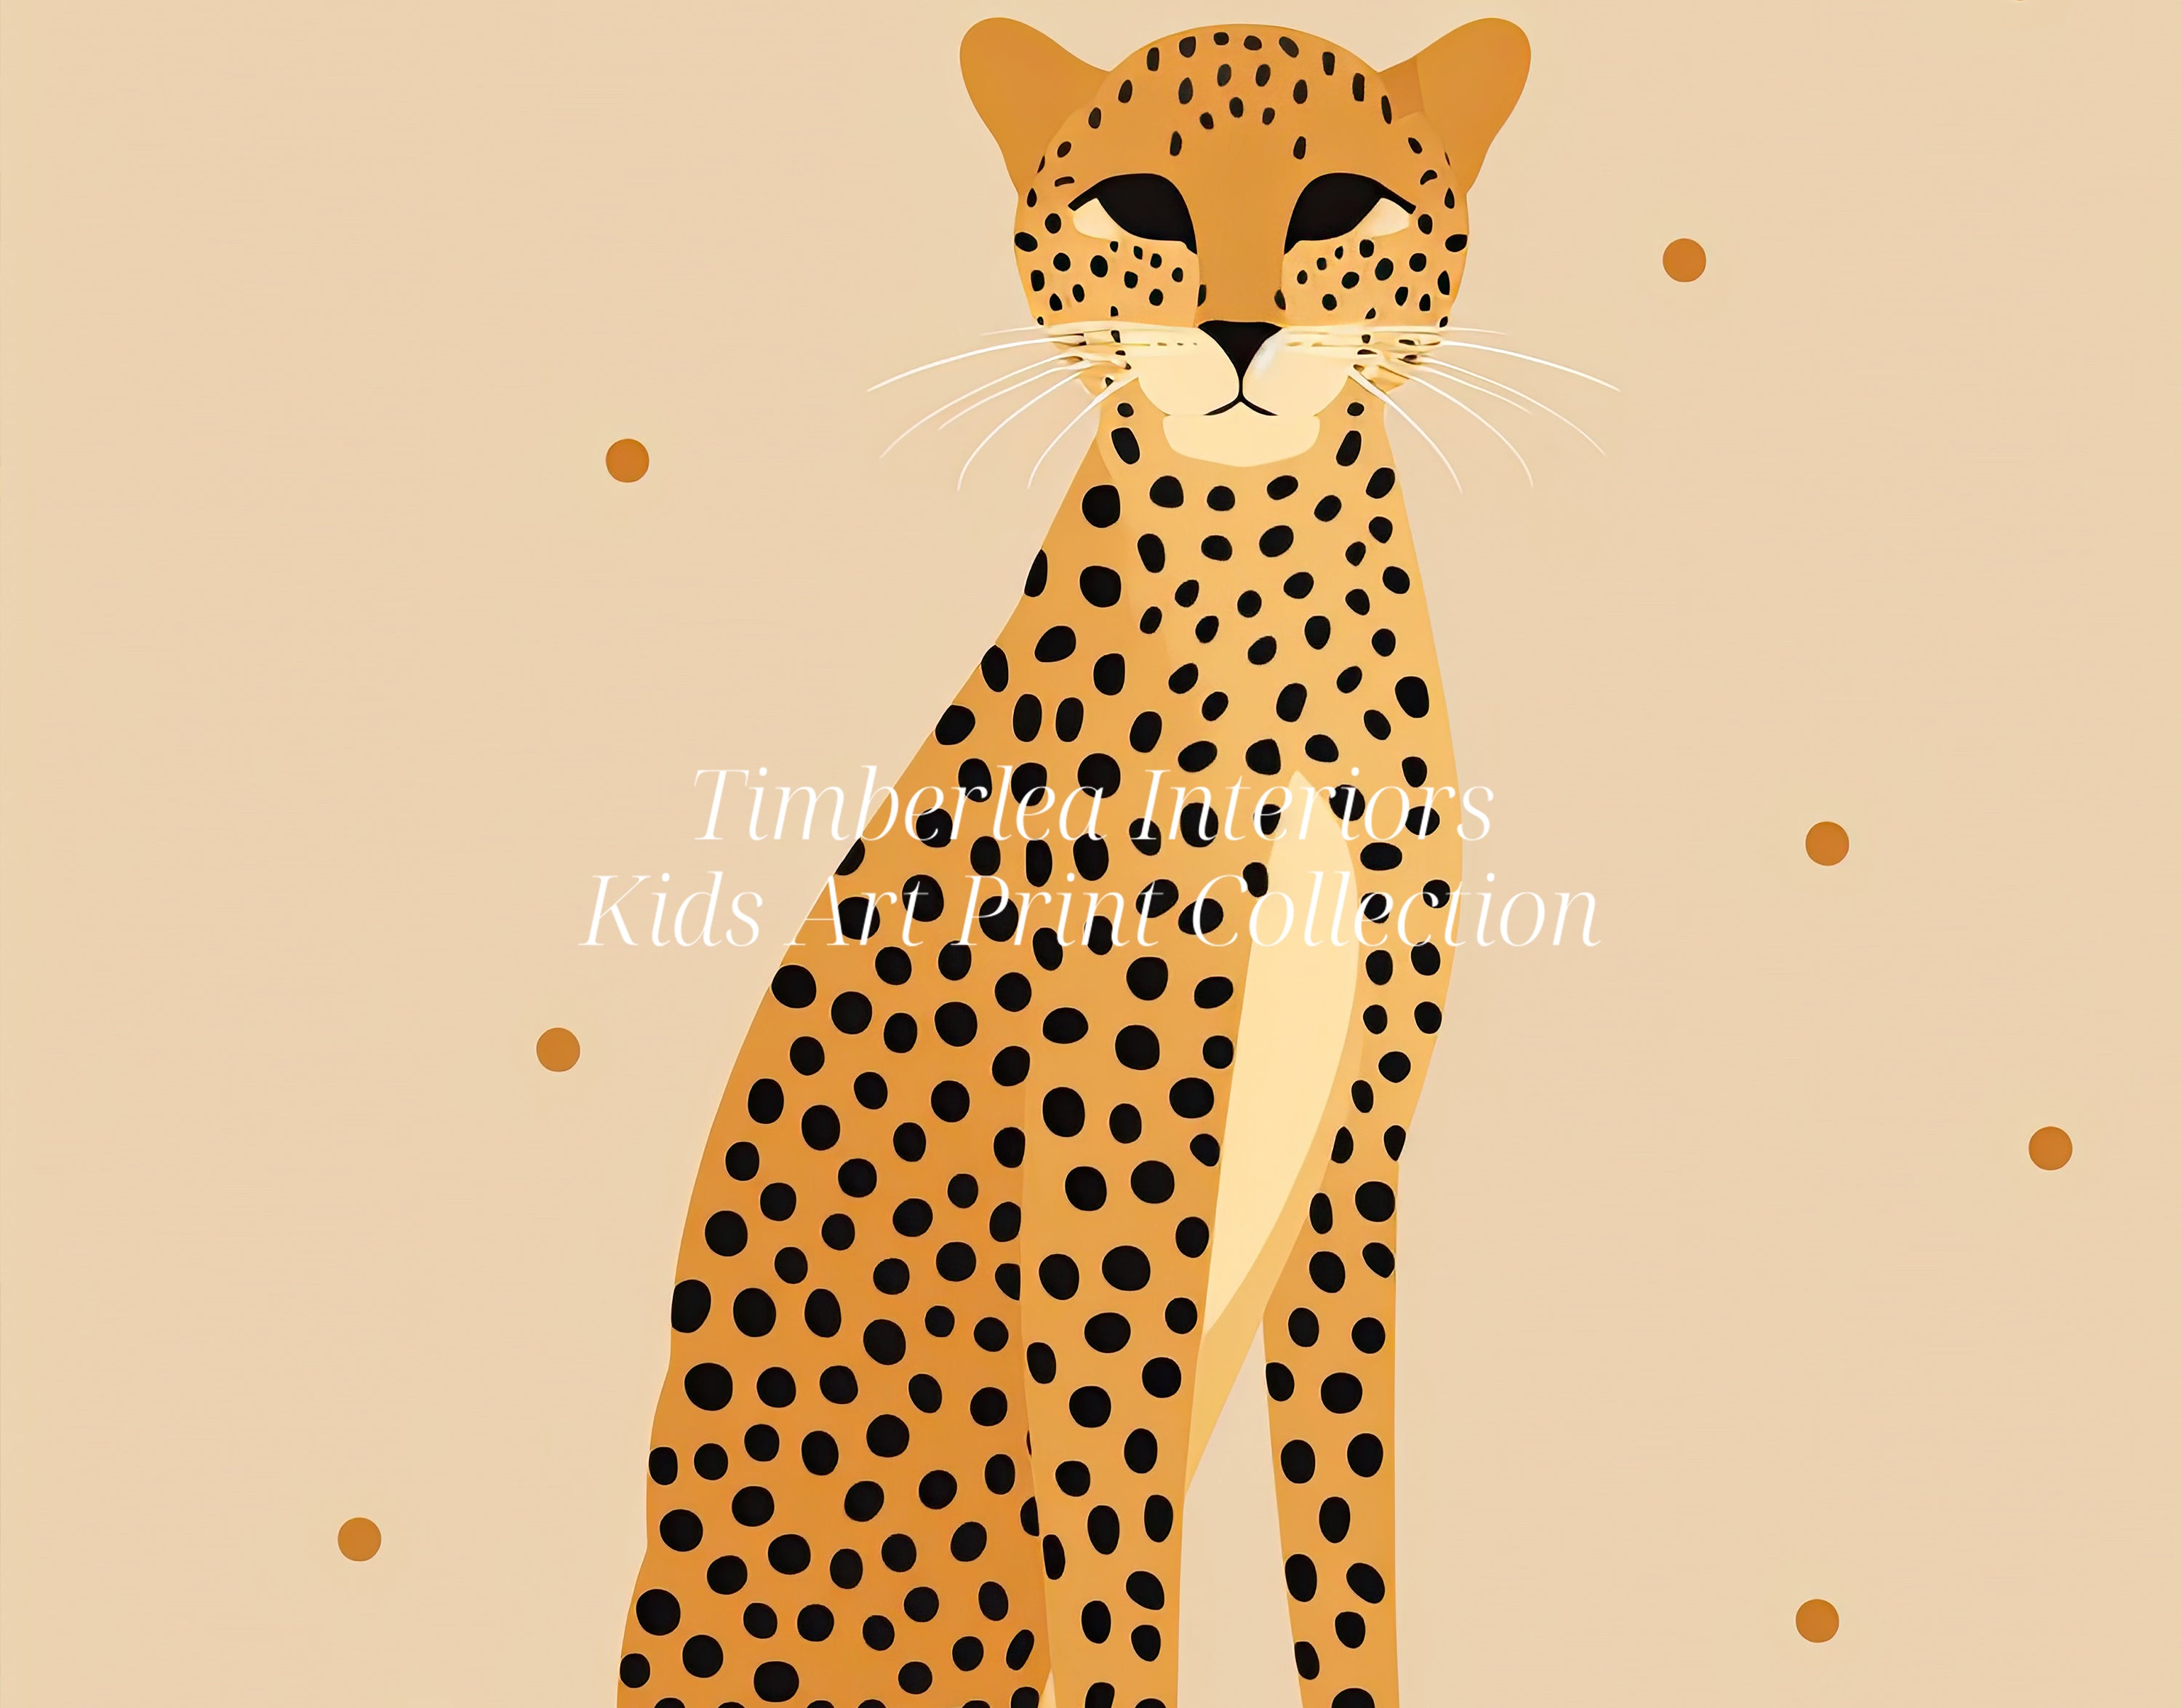 Close-up view of a minimalist art print featuring a poised leopard against a soft beige background with delicate dots